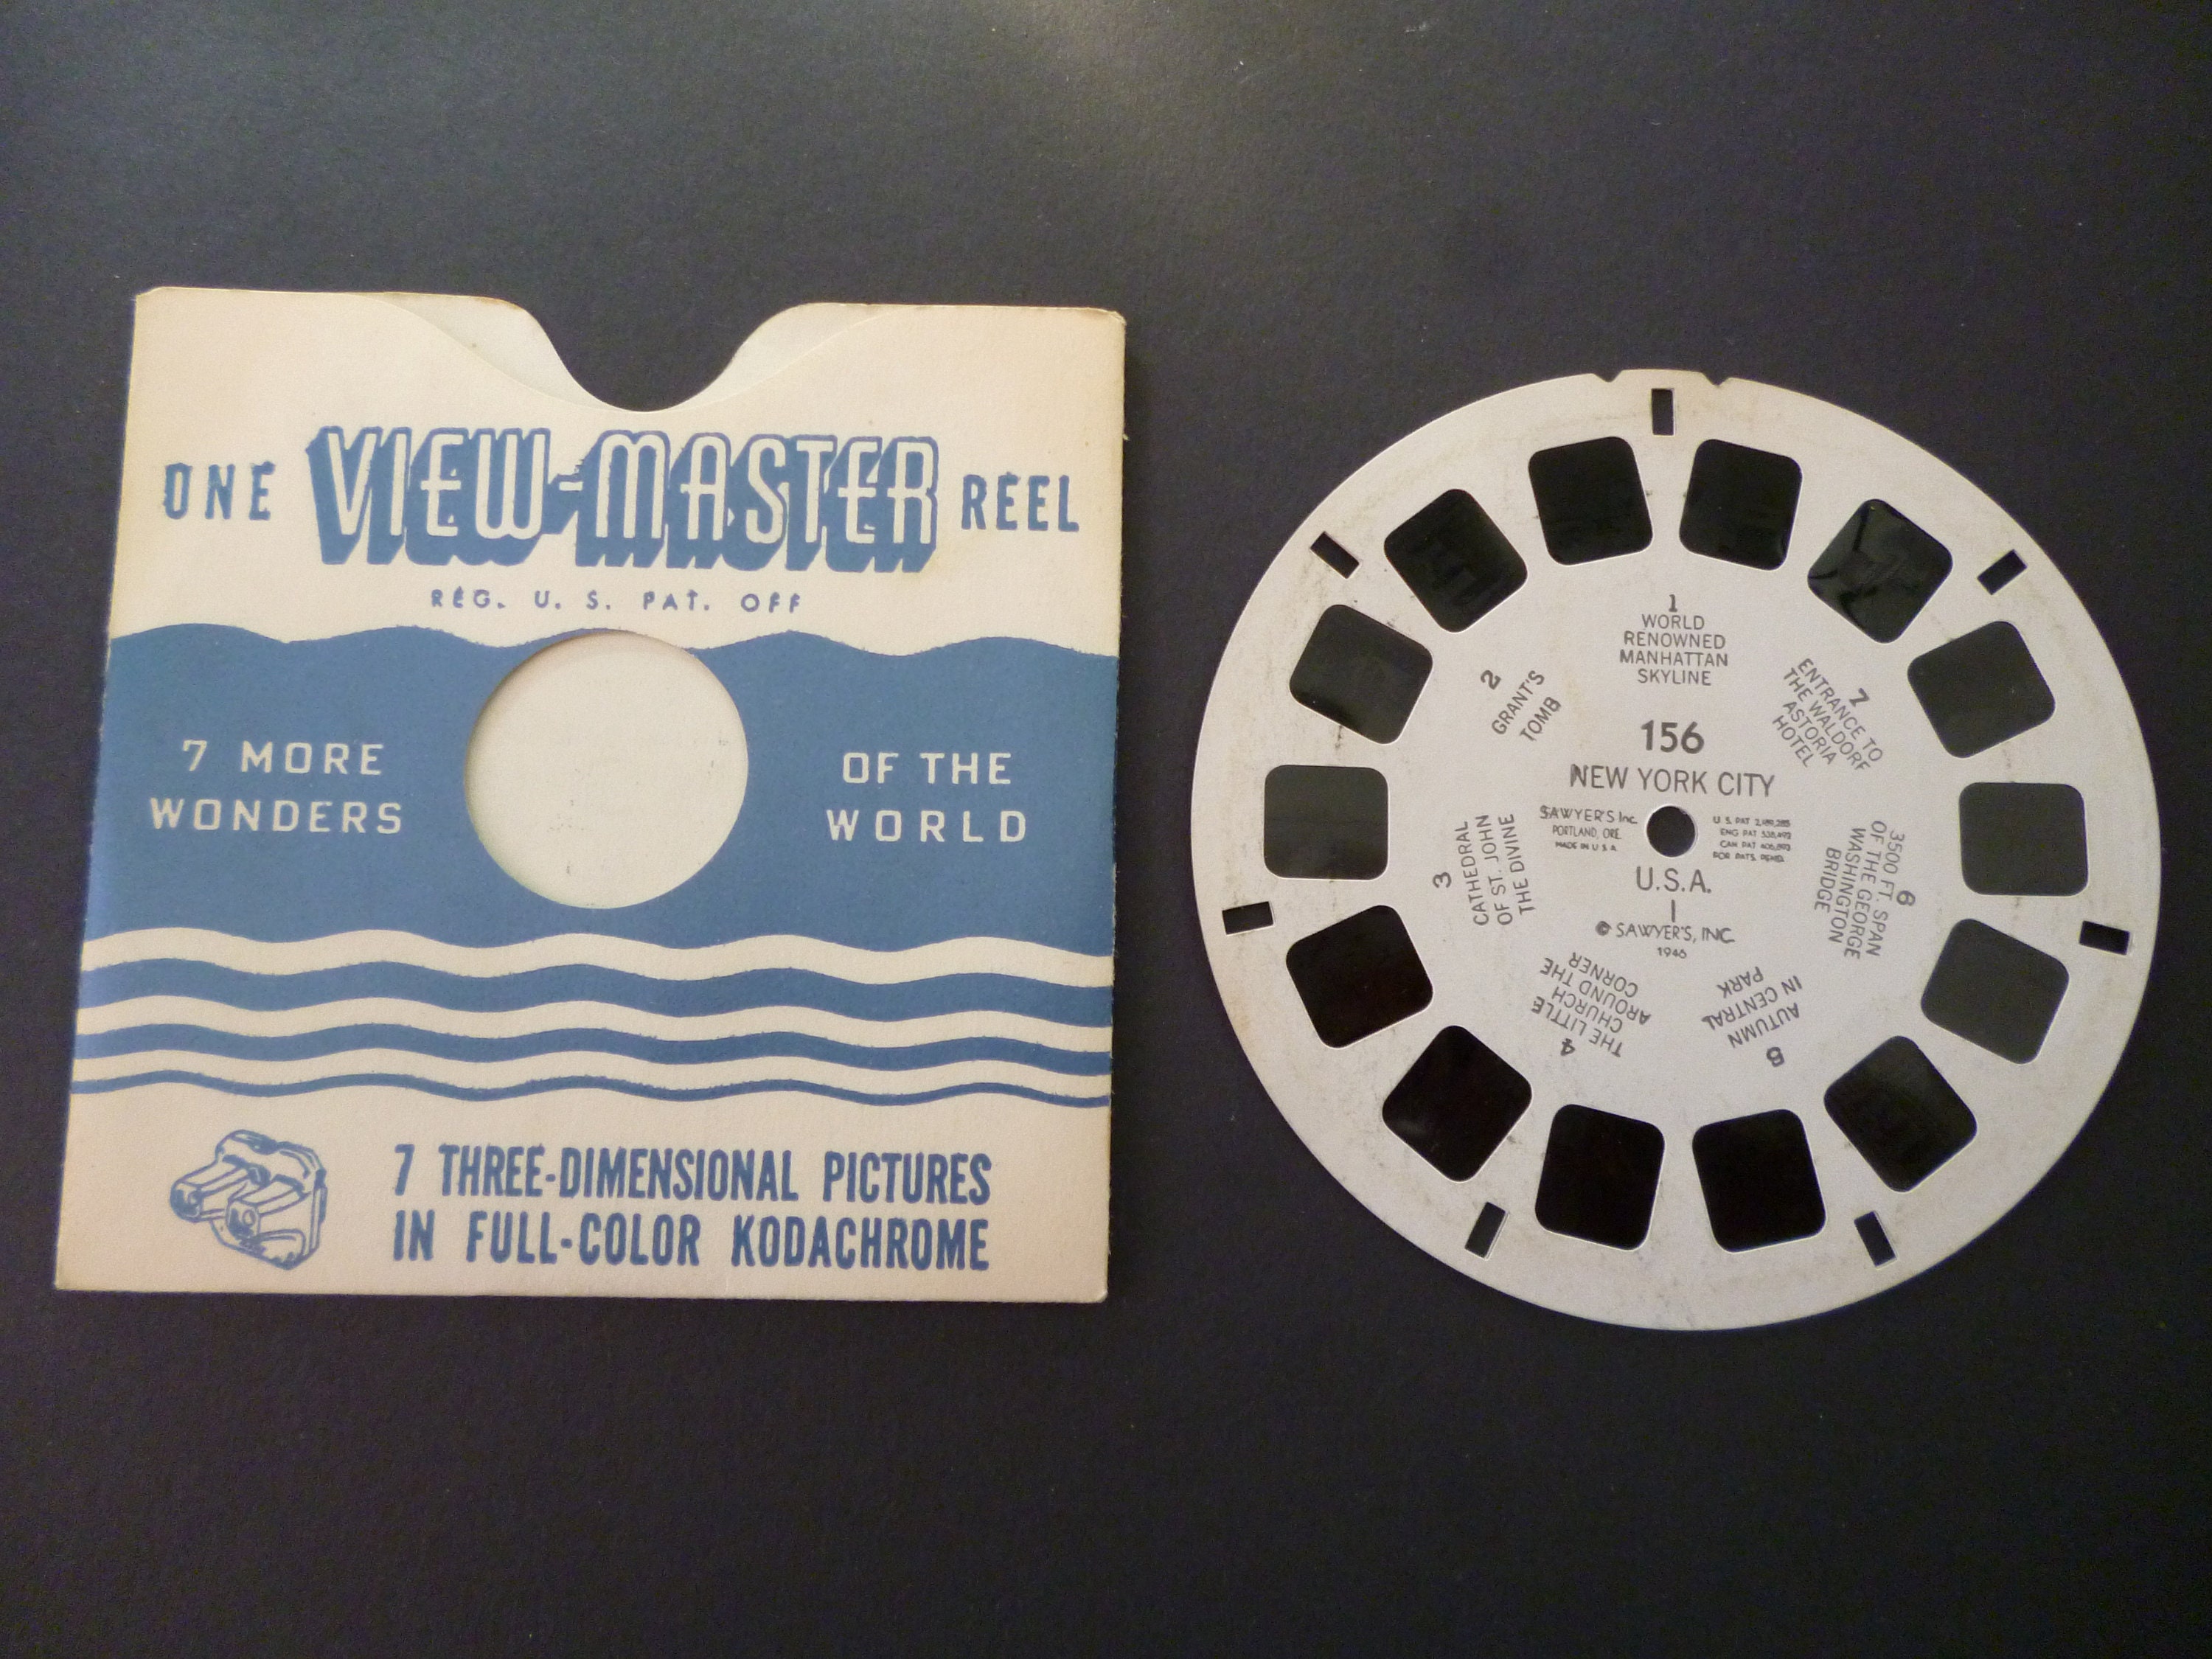 Sawyer's Viewmaster Vintage Reel From 1946 Featuring New York City